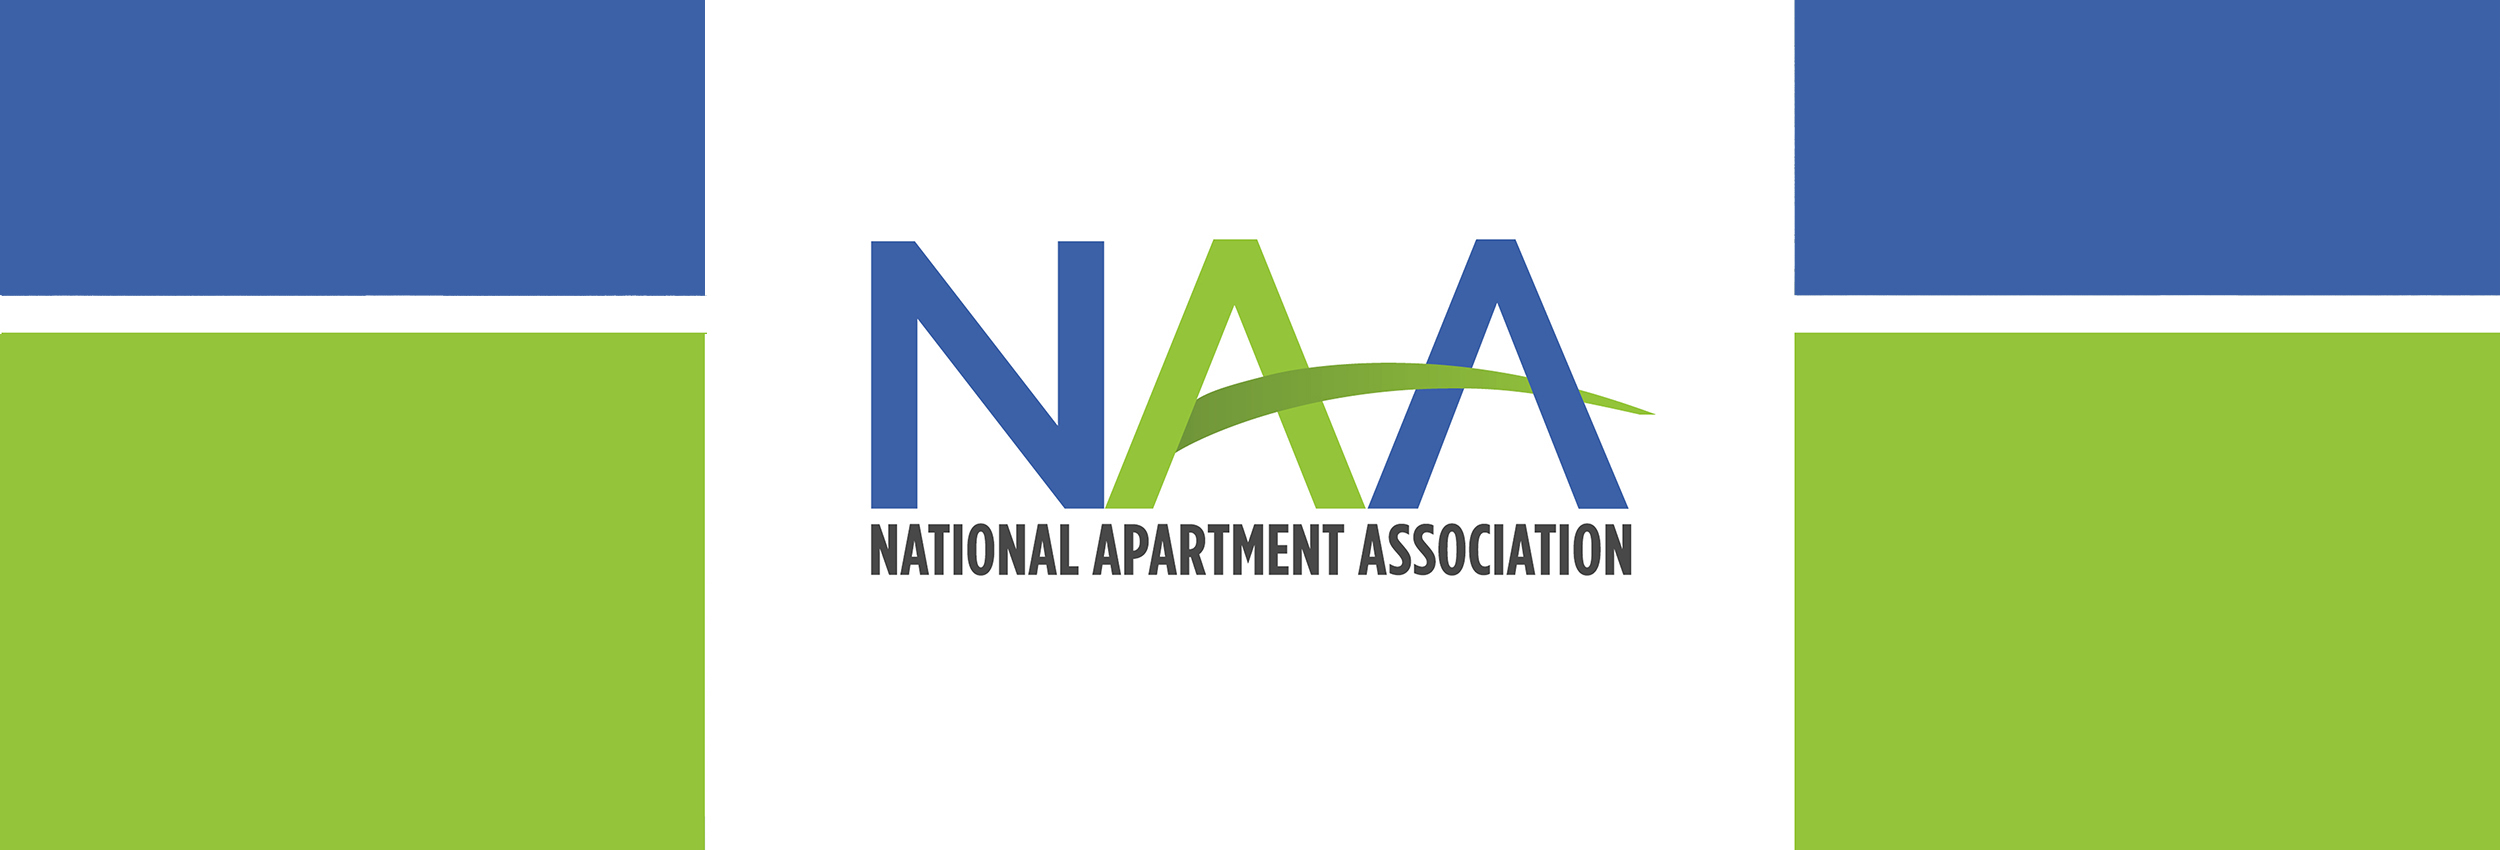 NAA logo on blue and green banner